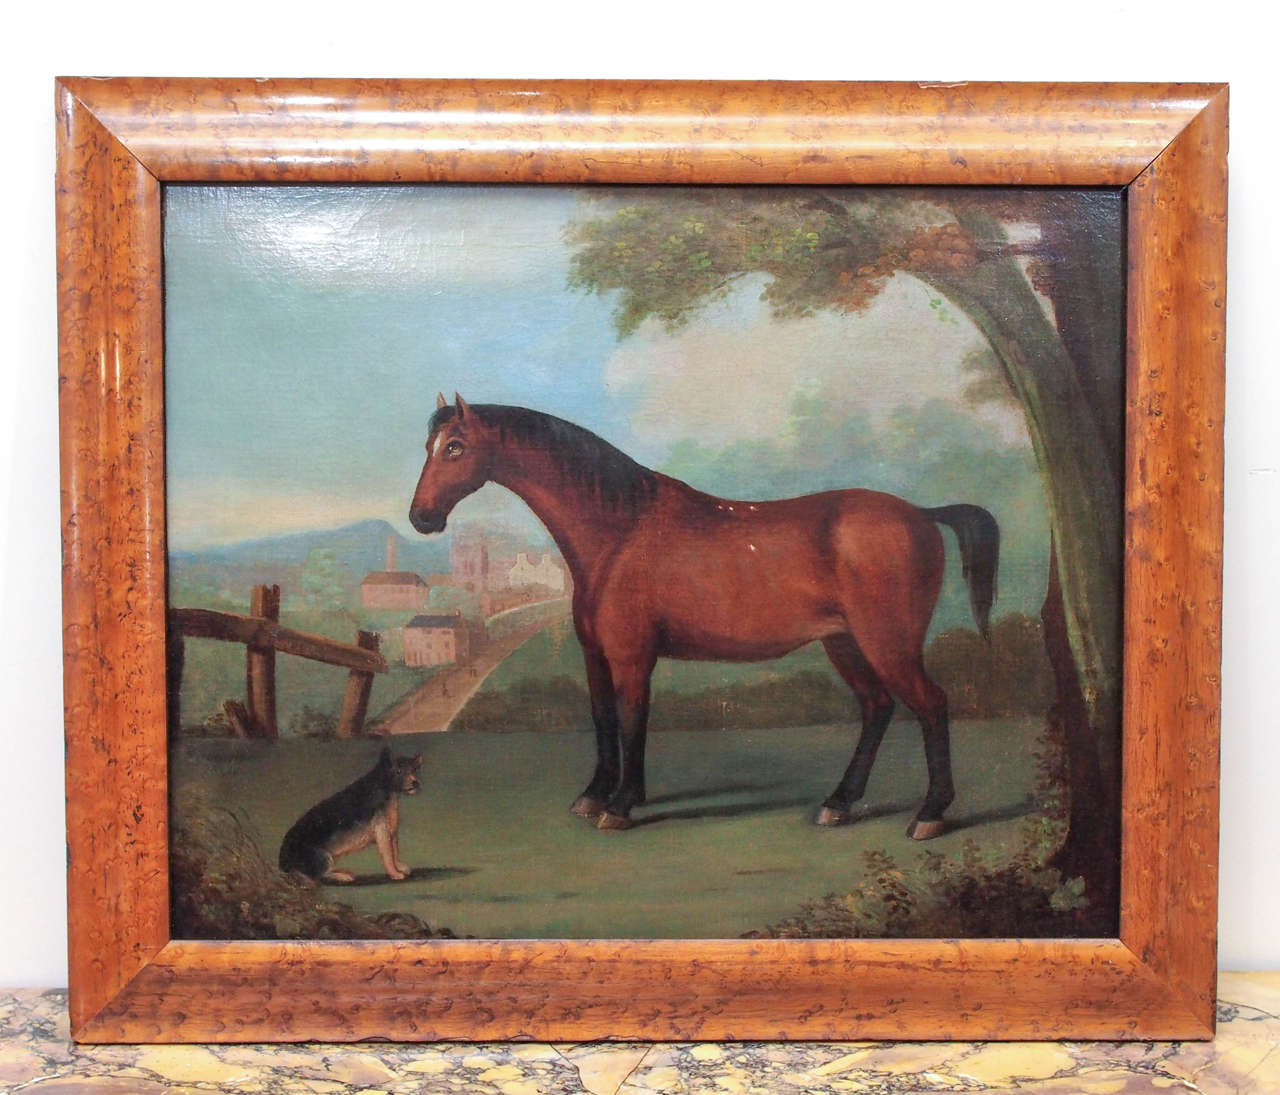 Portrait of a horse in naive setting with a dog on a hill above a town. In Birdseye maple frame. Inverso 